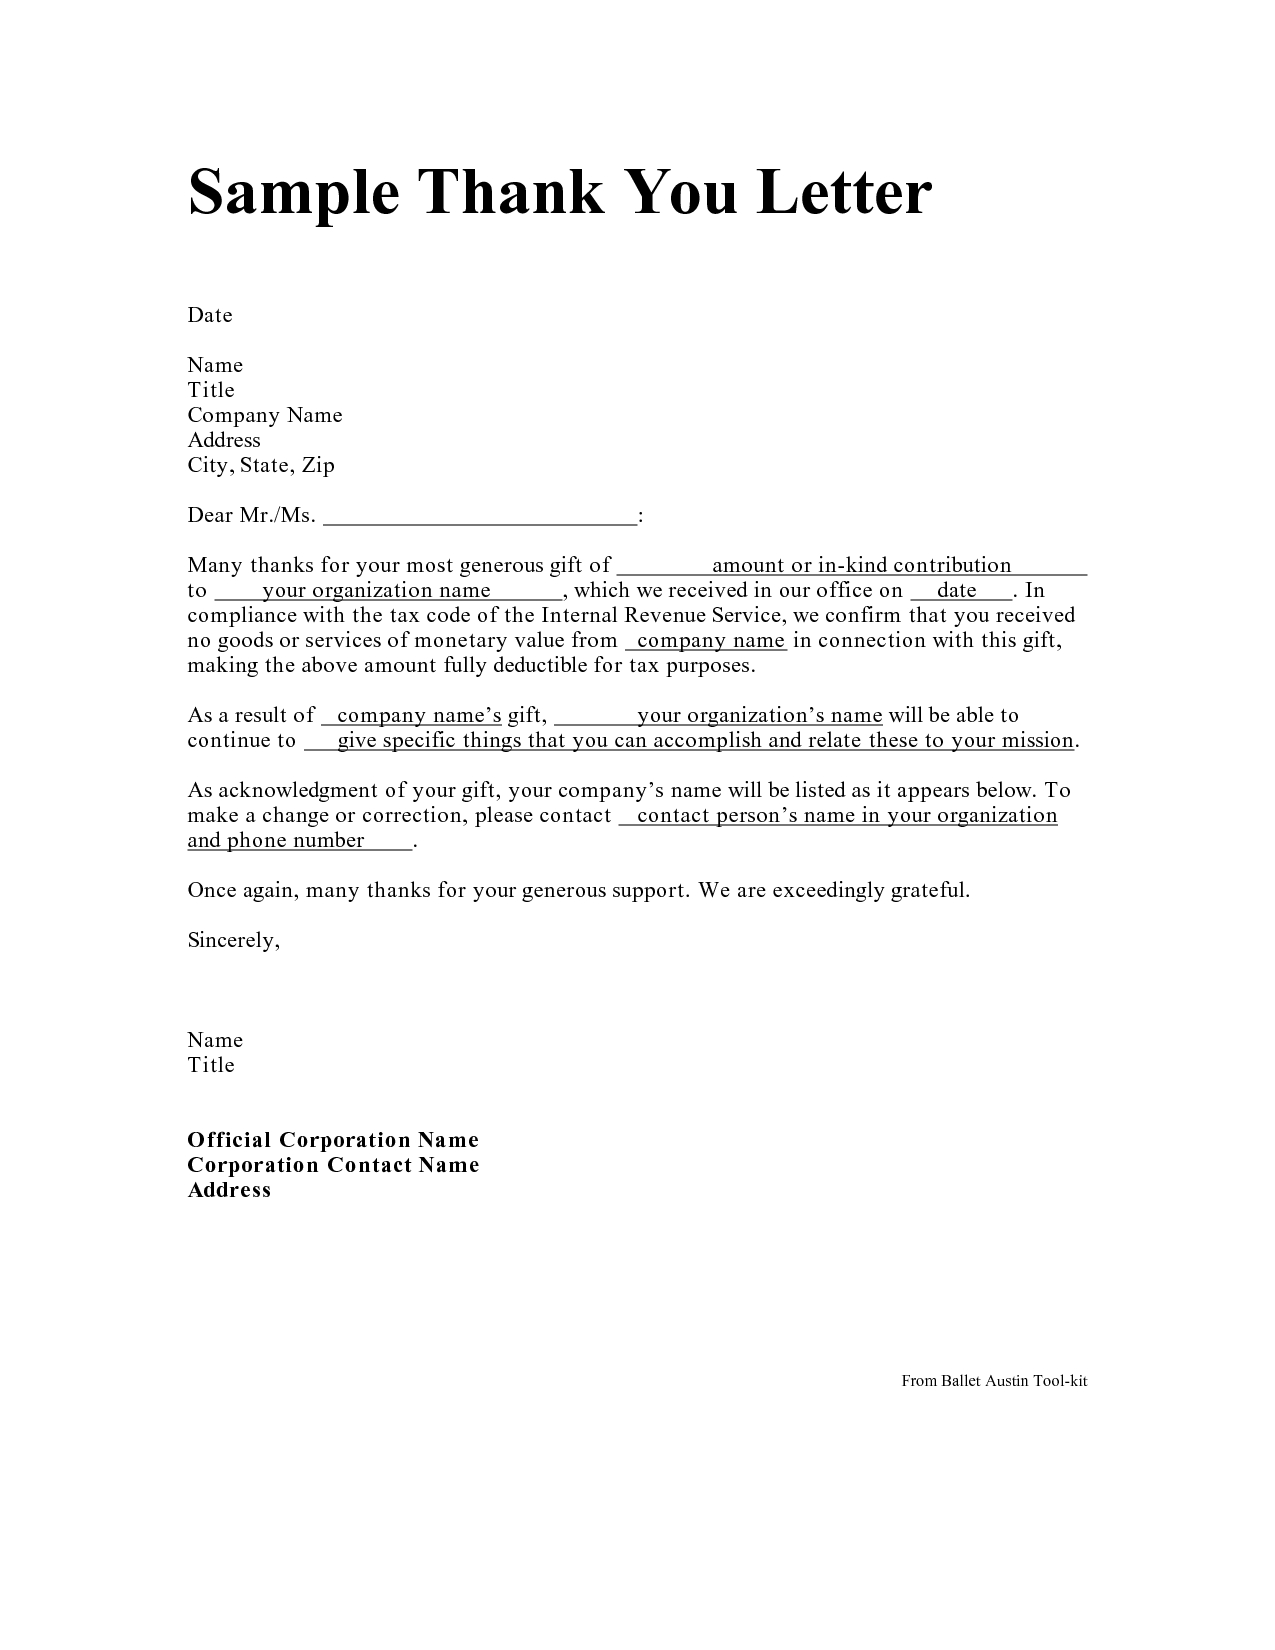 Change Of Name Letter Template - Personal Thank You Letter Personal Thank You Letter Samples